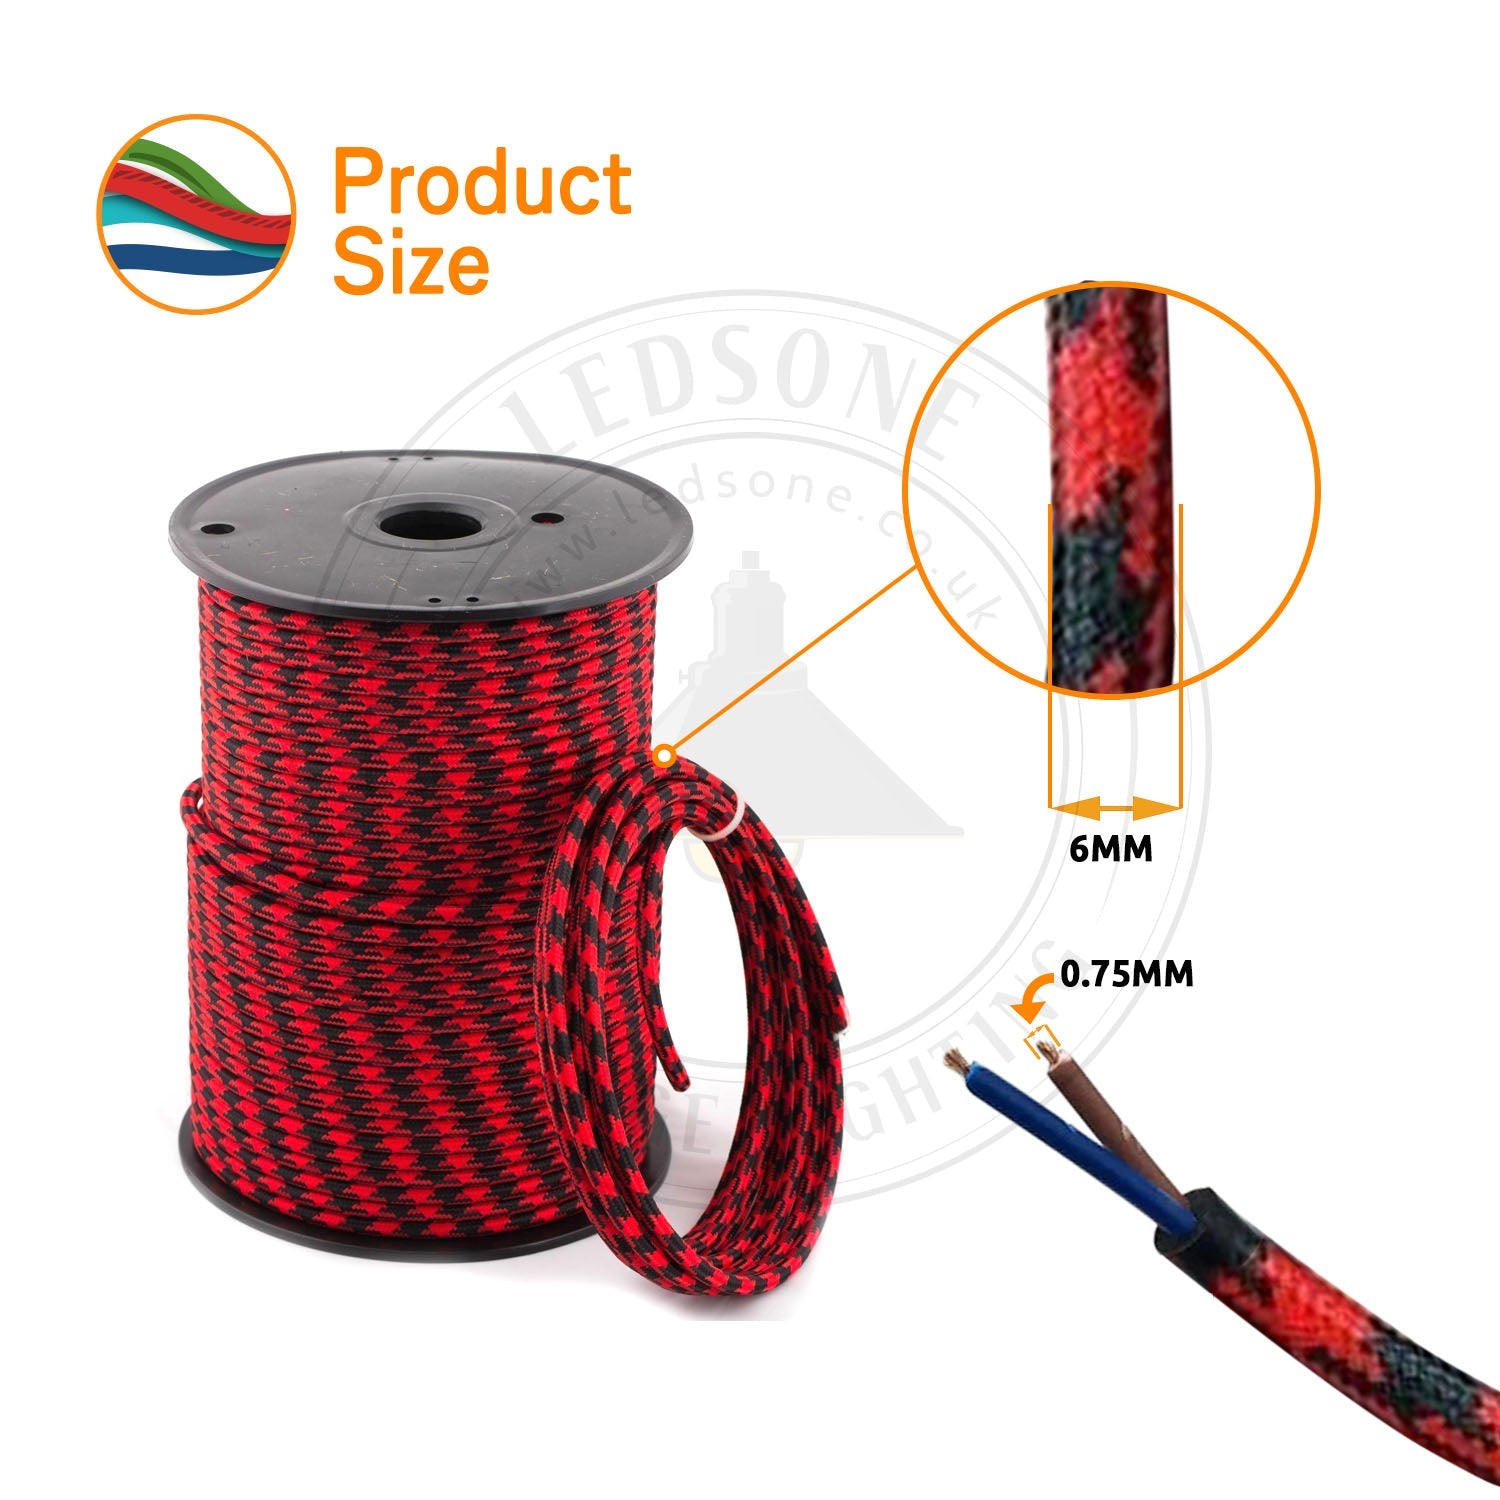 2-Core Electrical Round Cable with Orange Color fabric finish